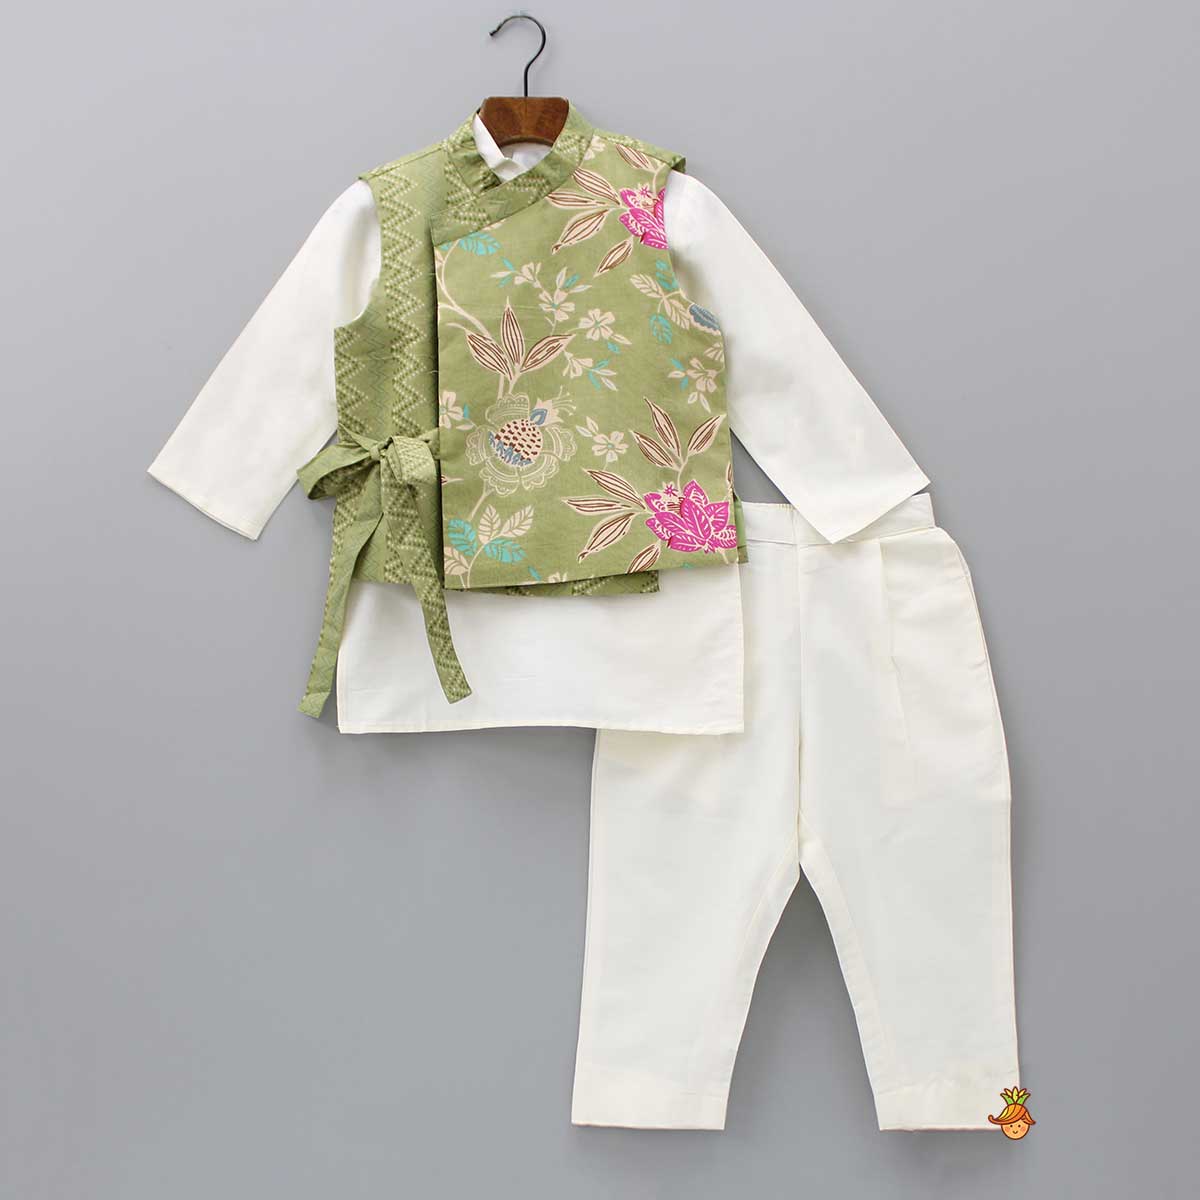 Off White Kurta With Side Knot Detail Printed Green Jacket And Pyjama